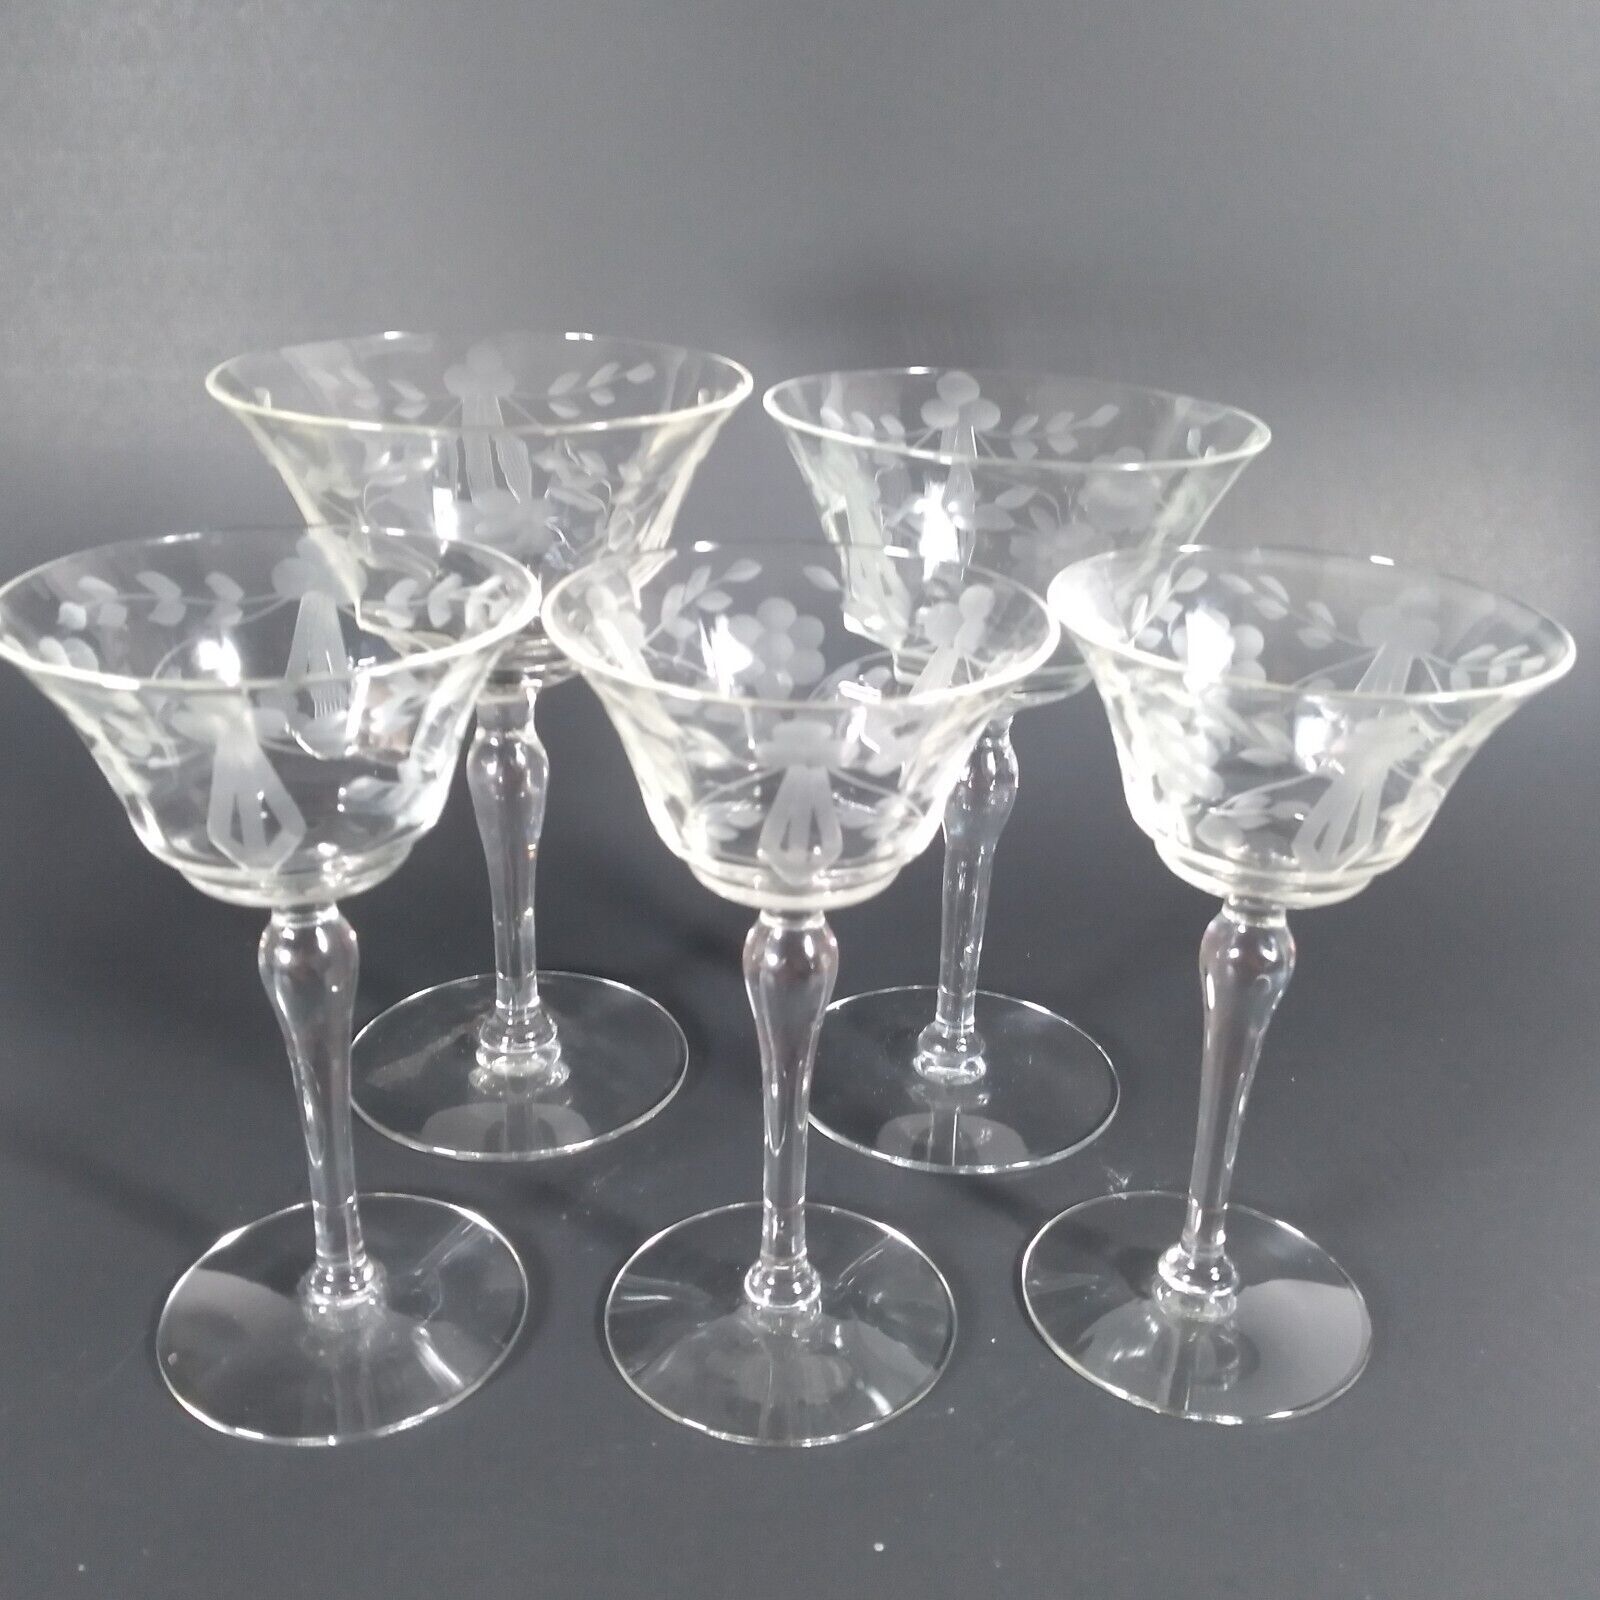 5 Pcs Crystal Etched Wine and Cocktail Glasses Flowers and Ribbon Teardrop Stems